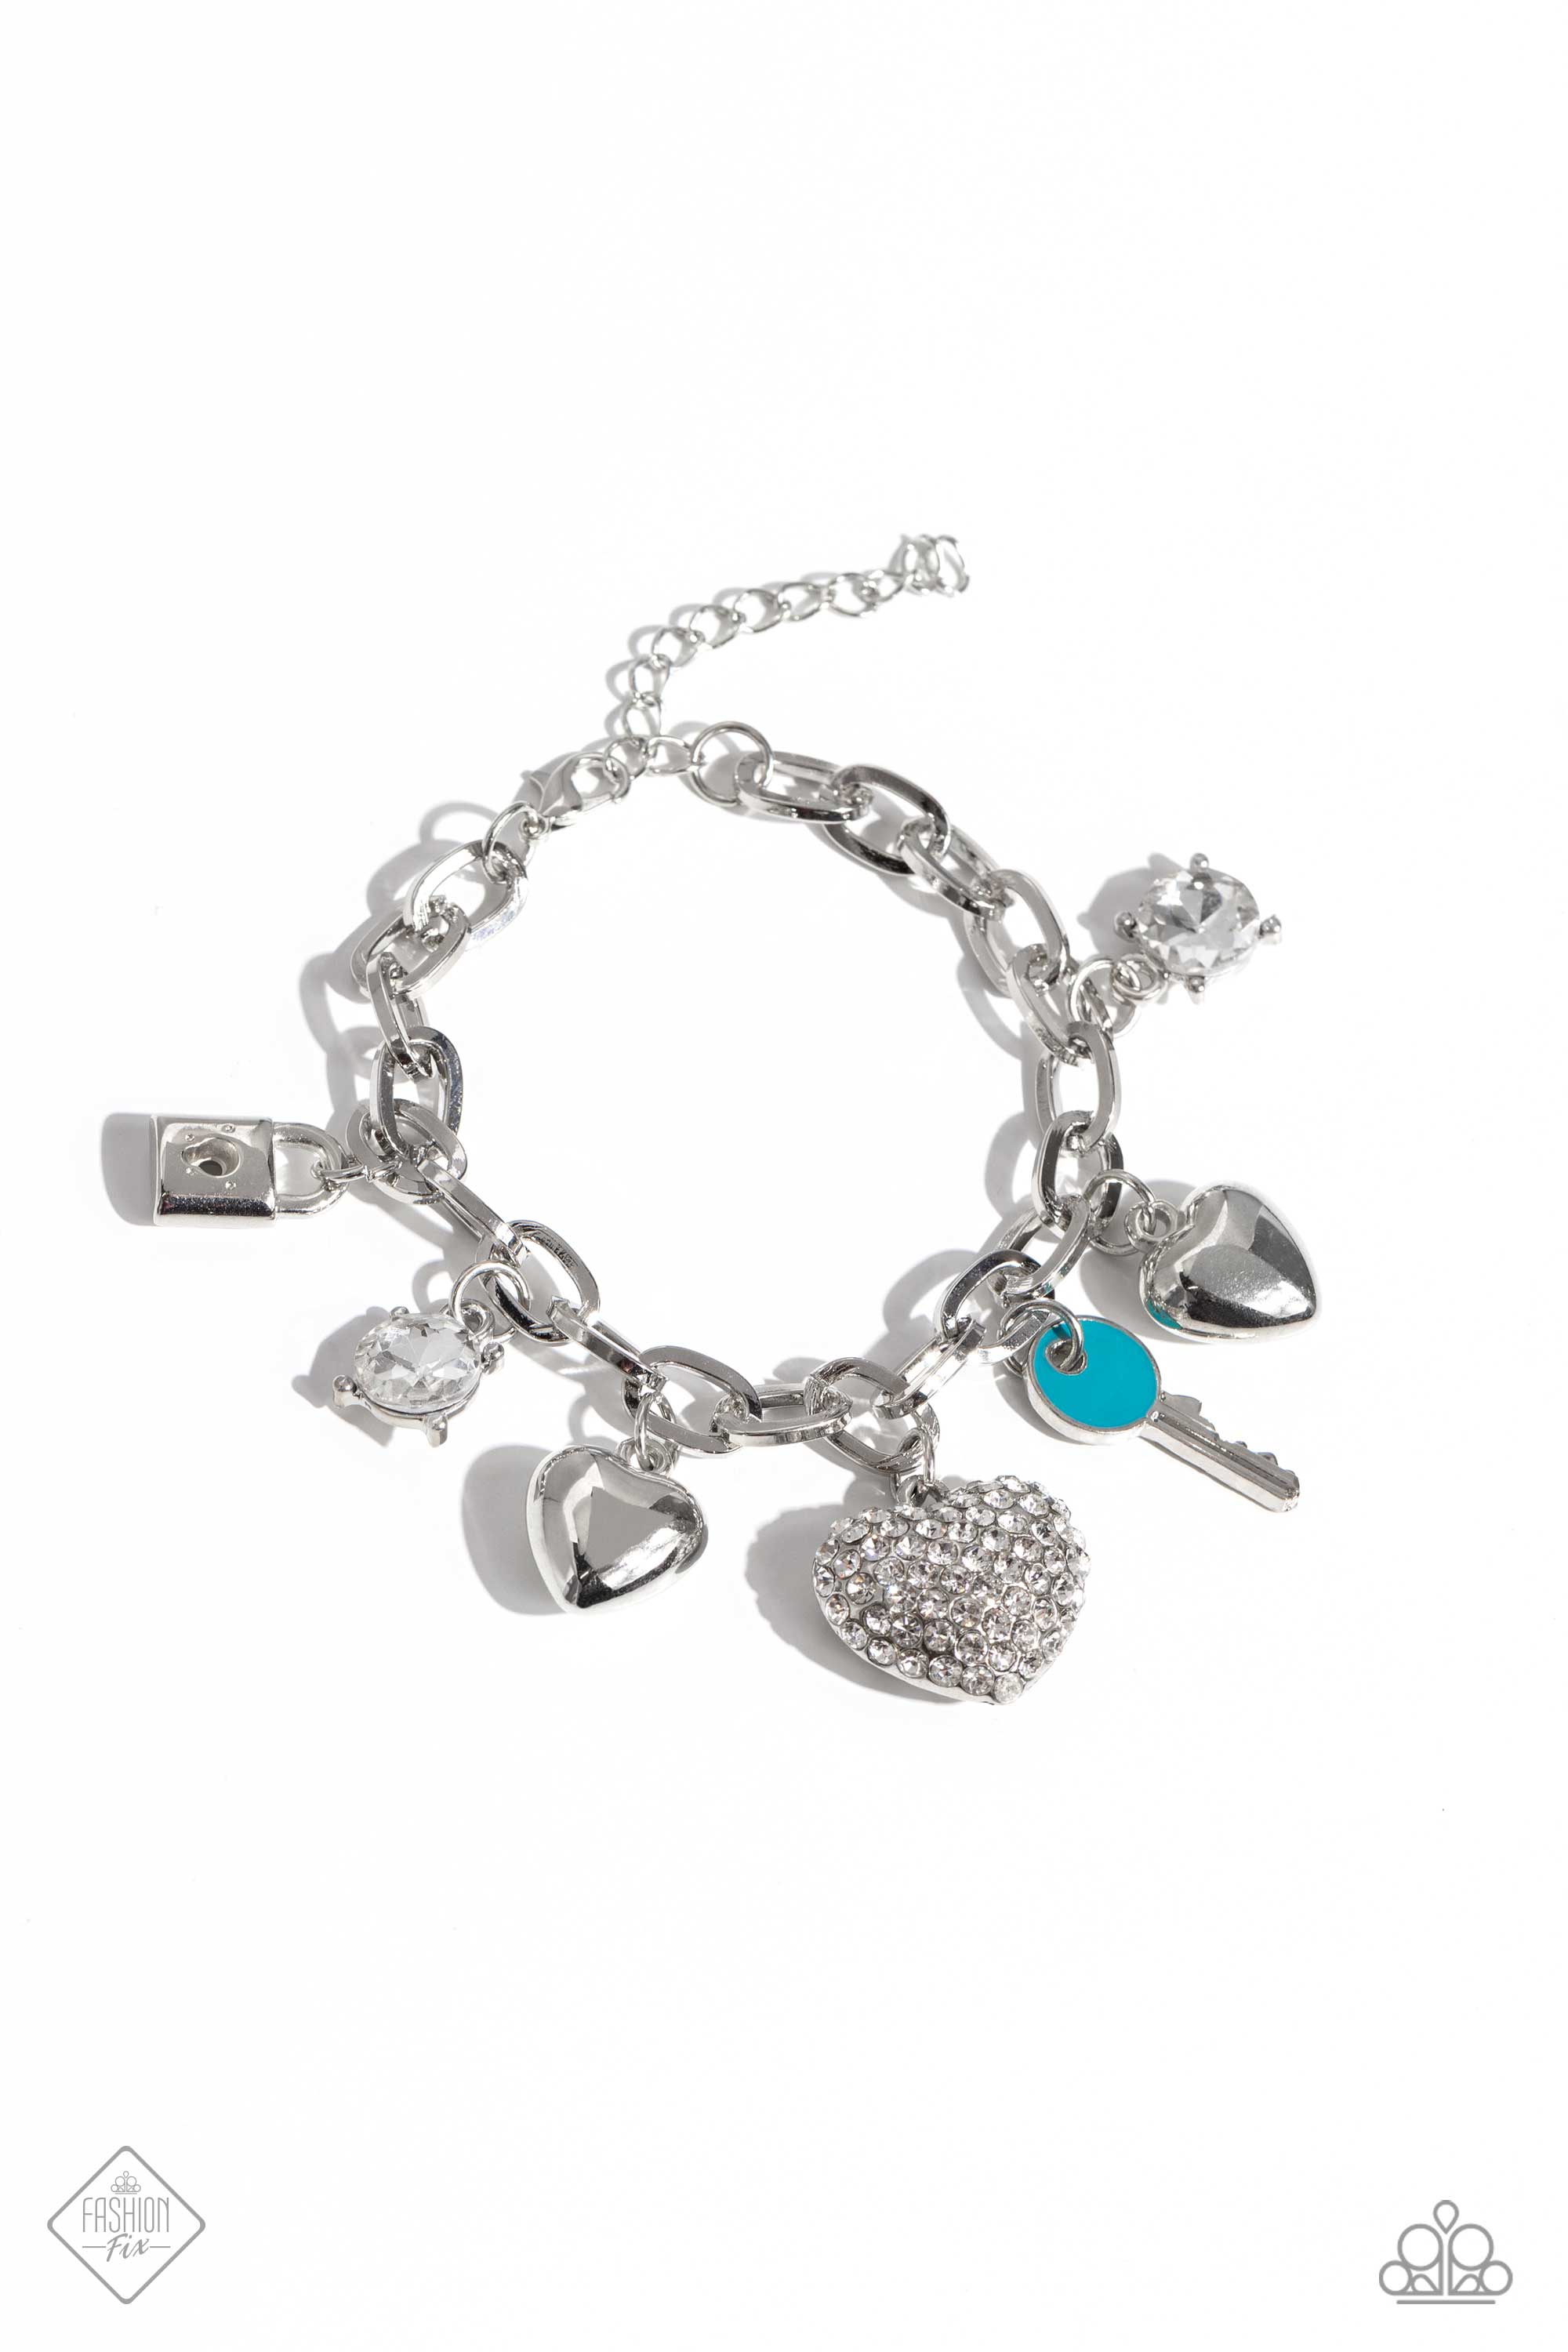 Charming Color White & Silver Charm Bracelet - Paparazzi Accessories- lightbox - CarasShop.com - $5 Jewelry by Cara Jewels